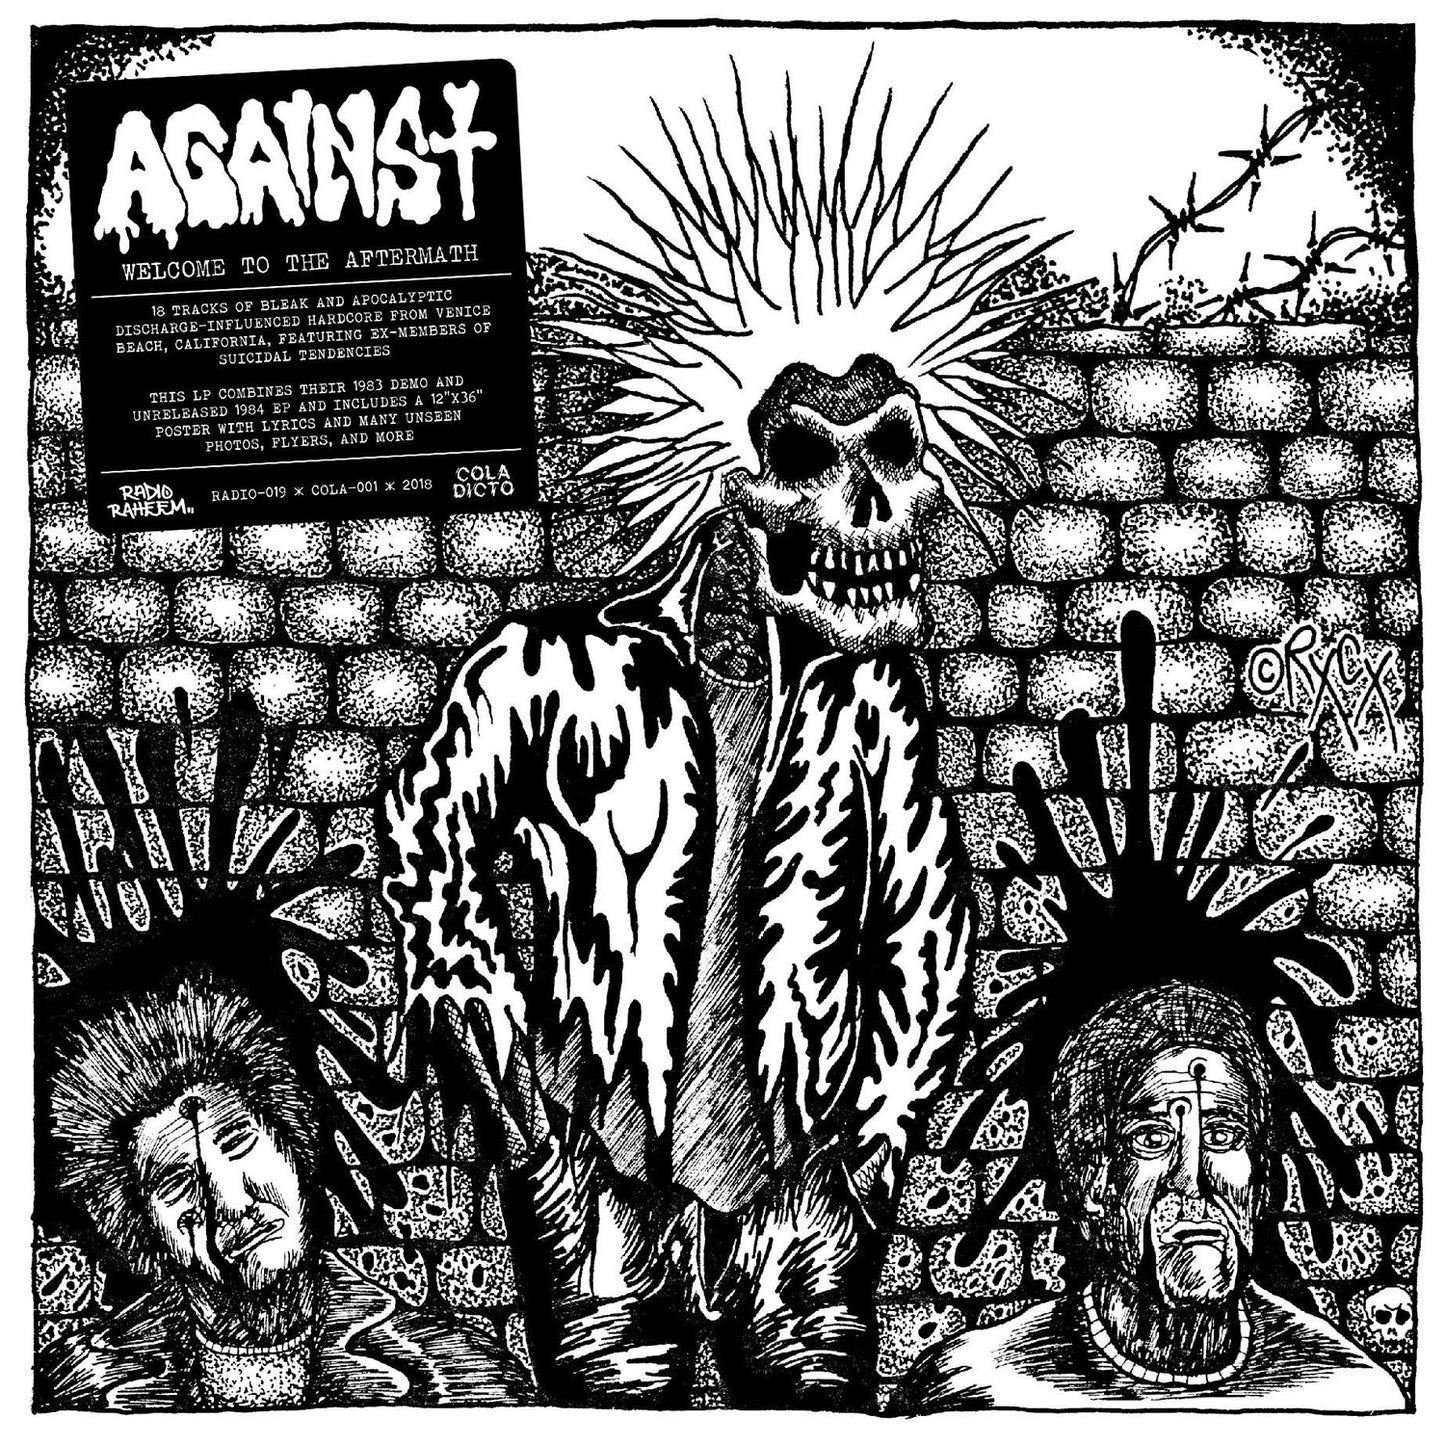 Against "Welcome To The Aftermath" LP